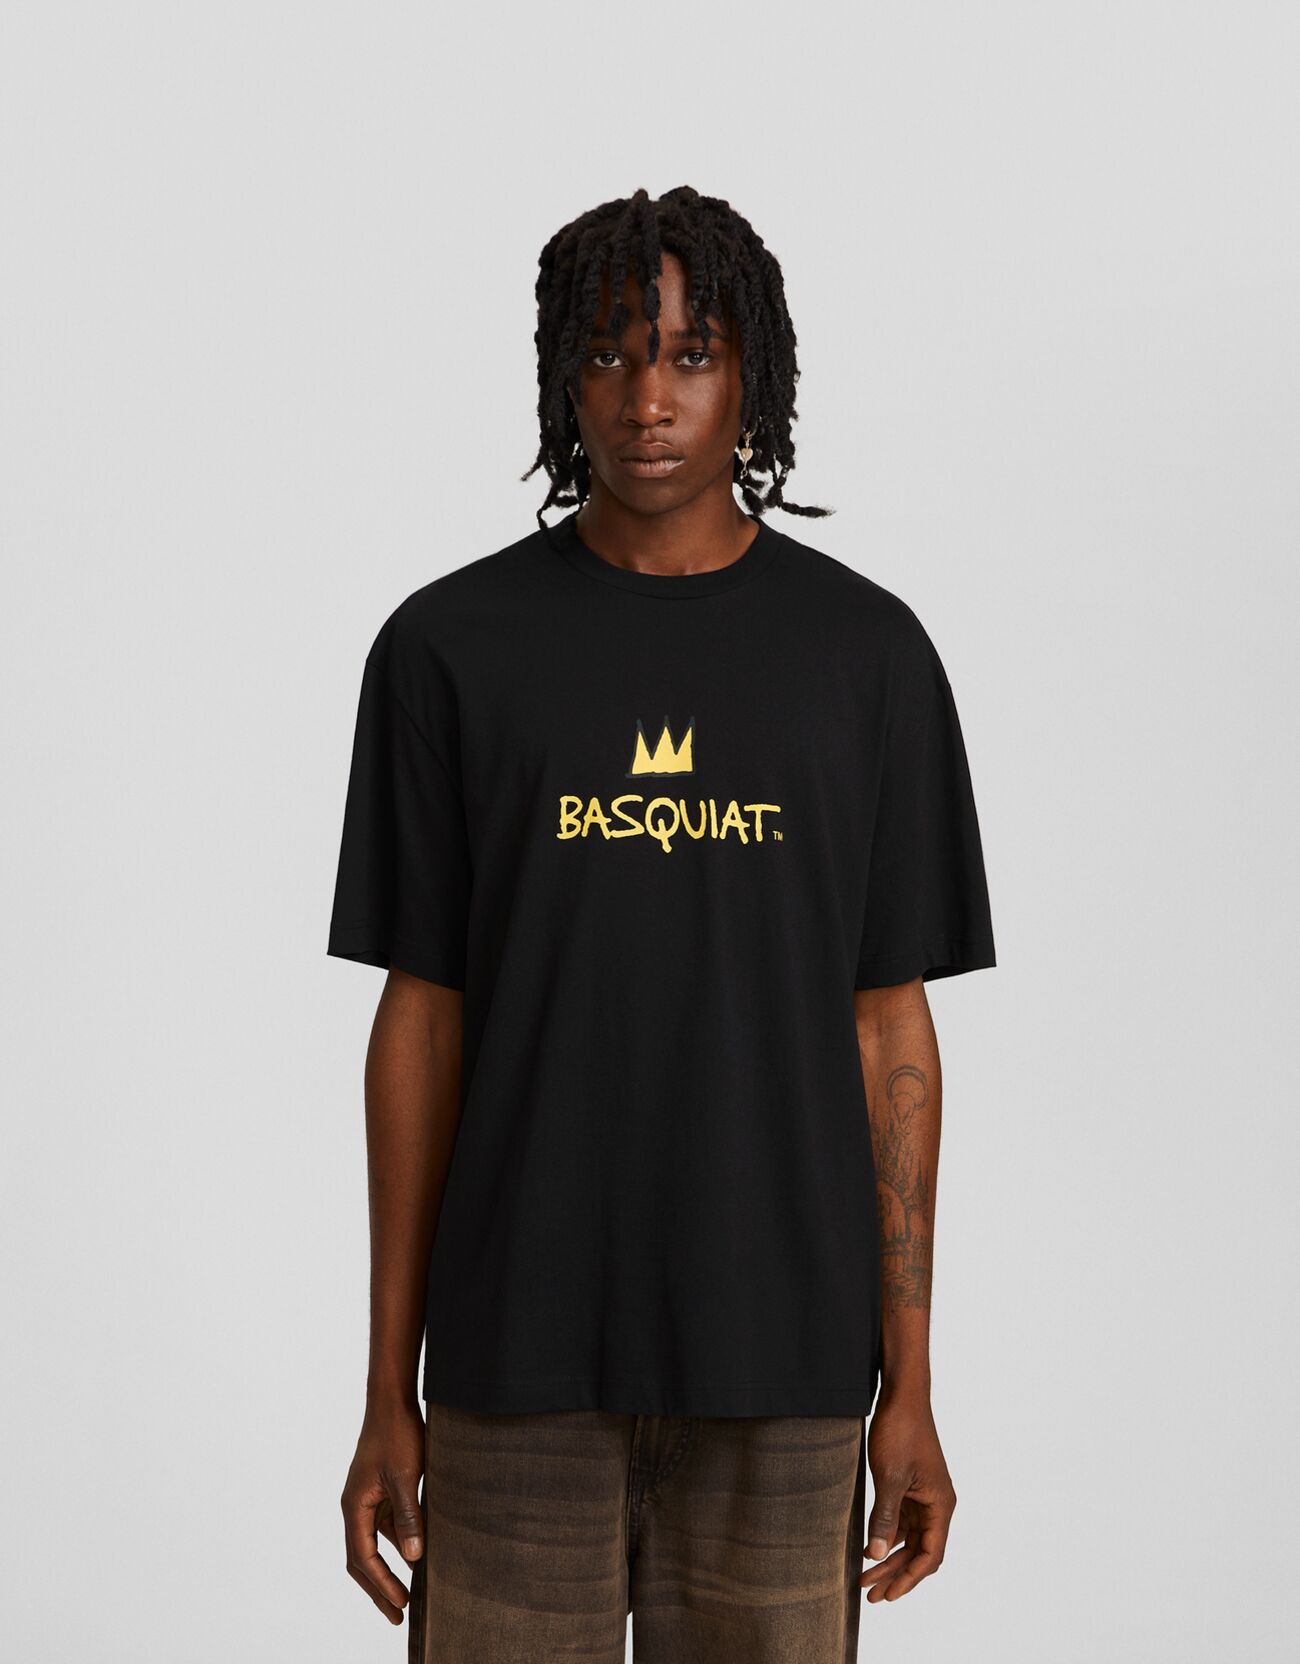 Jean-Michel Basquiat - Crown, Embroidered T-Shirt (Unisex) for Sale